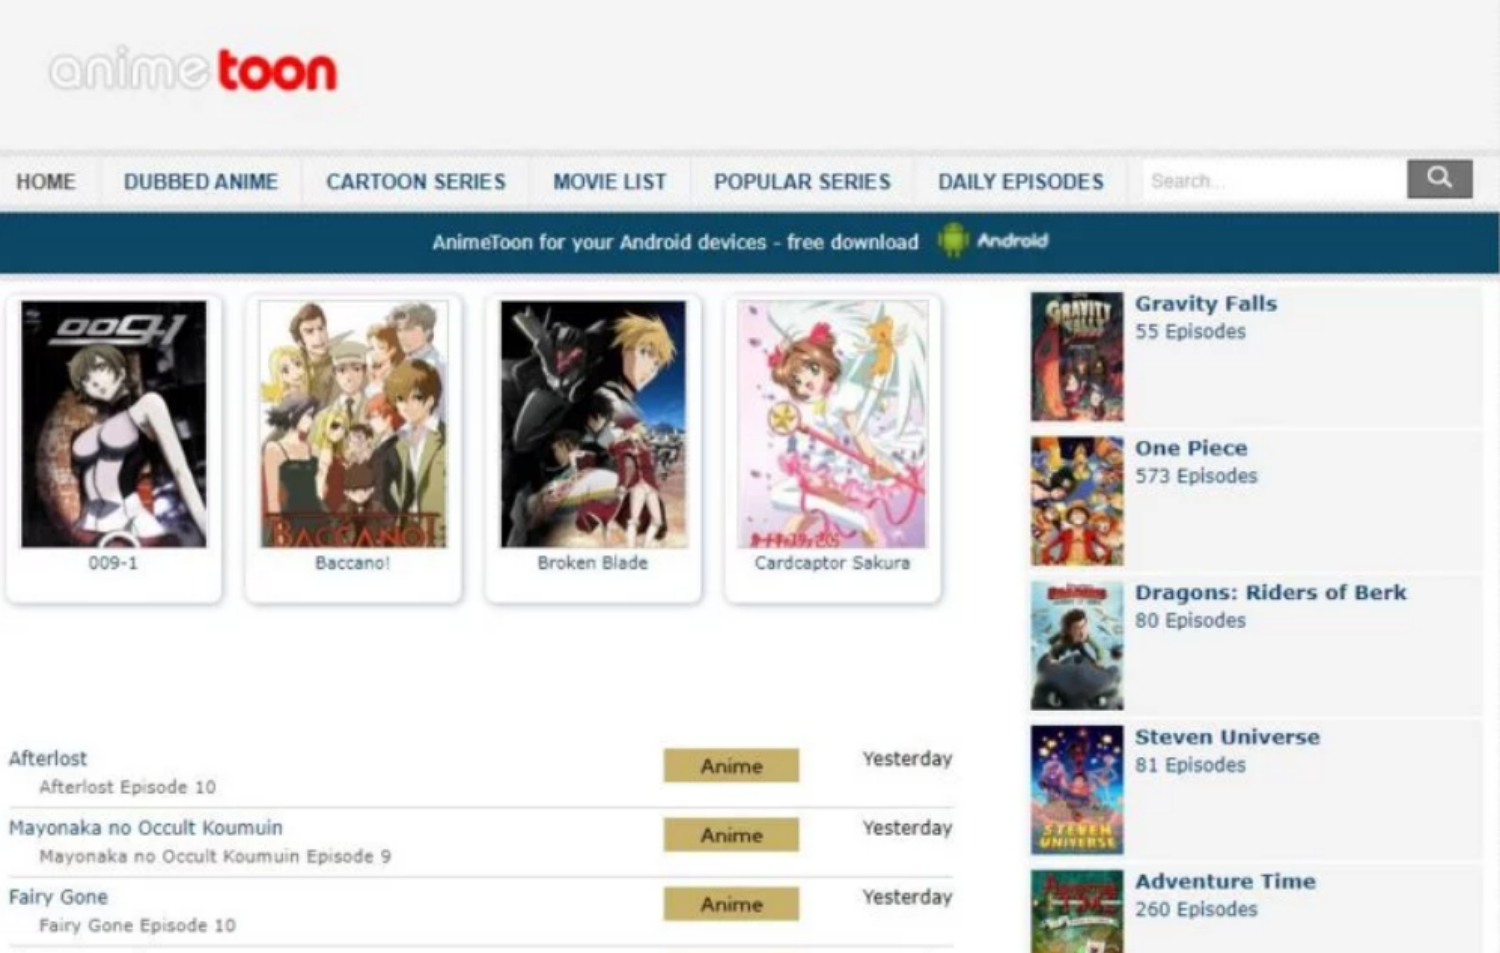 Best places to stream anime in 2022: Hulu, Crunchyroll, and more